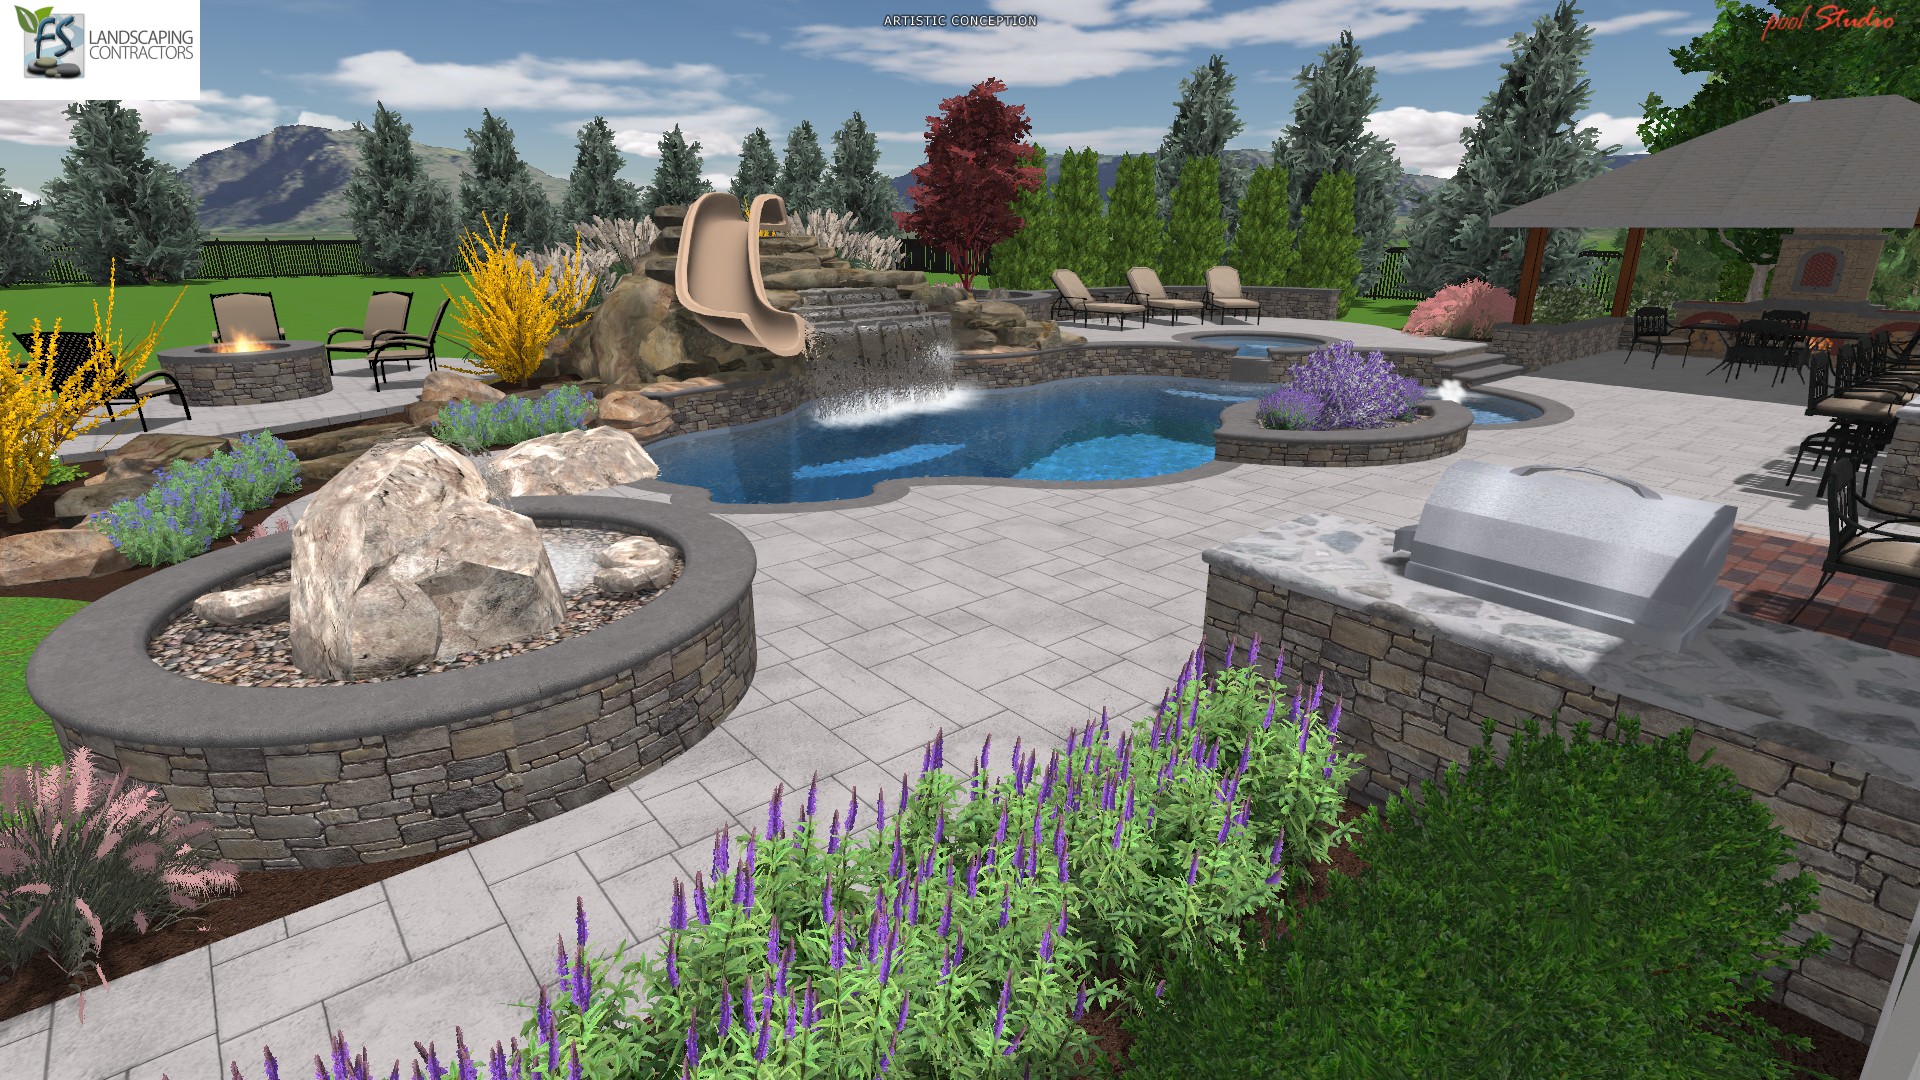 Tag Archive for "pool builder" - Landscaping Company NJ ...